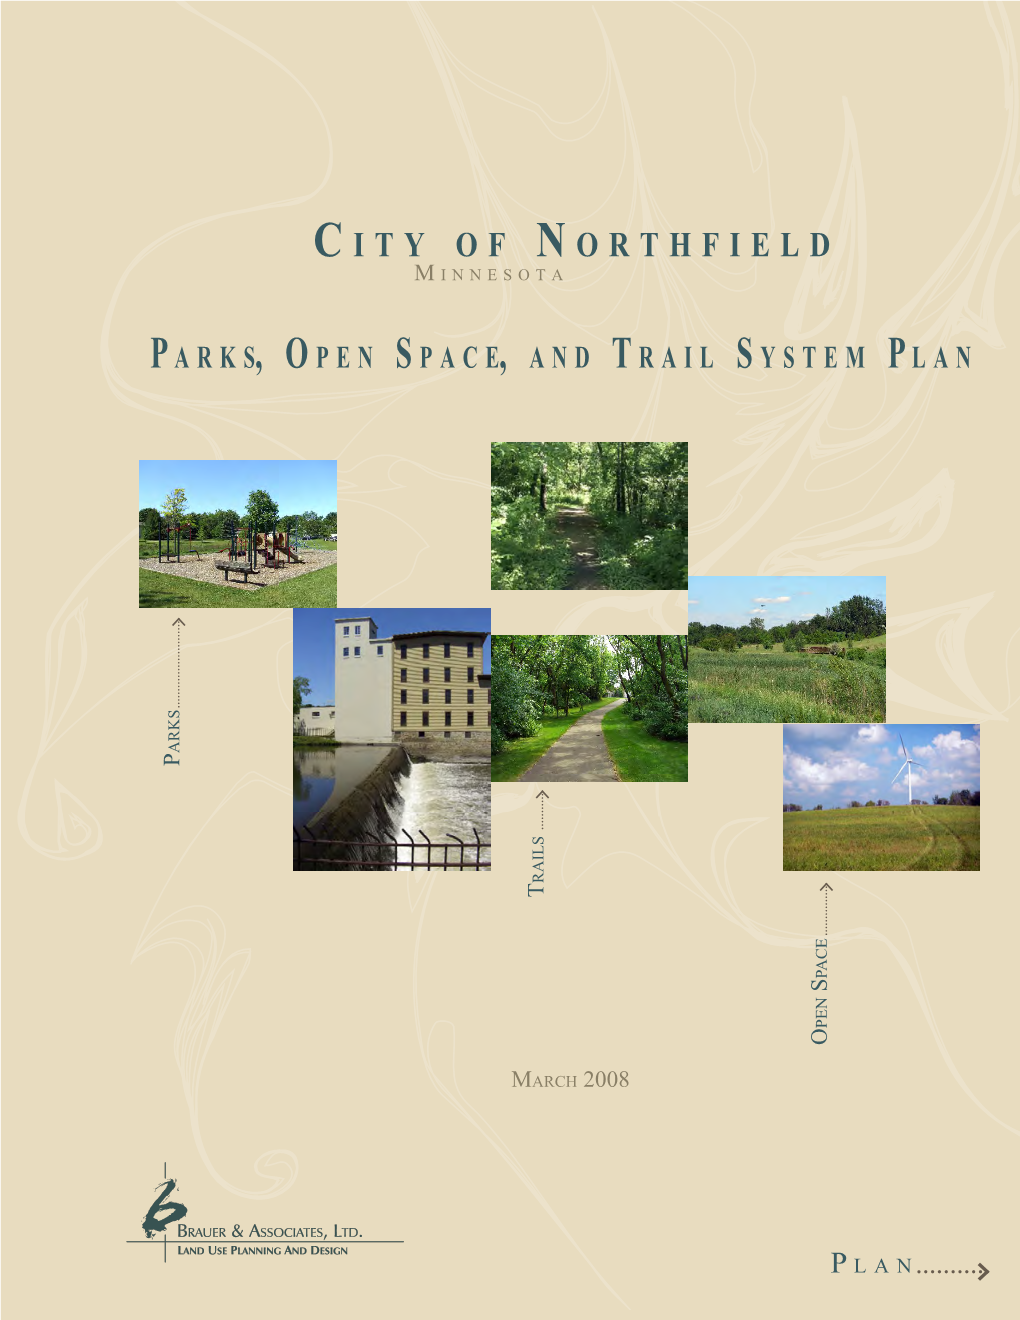 Parks, Open Space, and Trail System Plan for the City